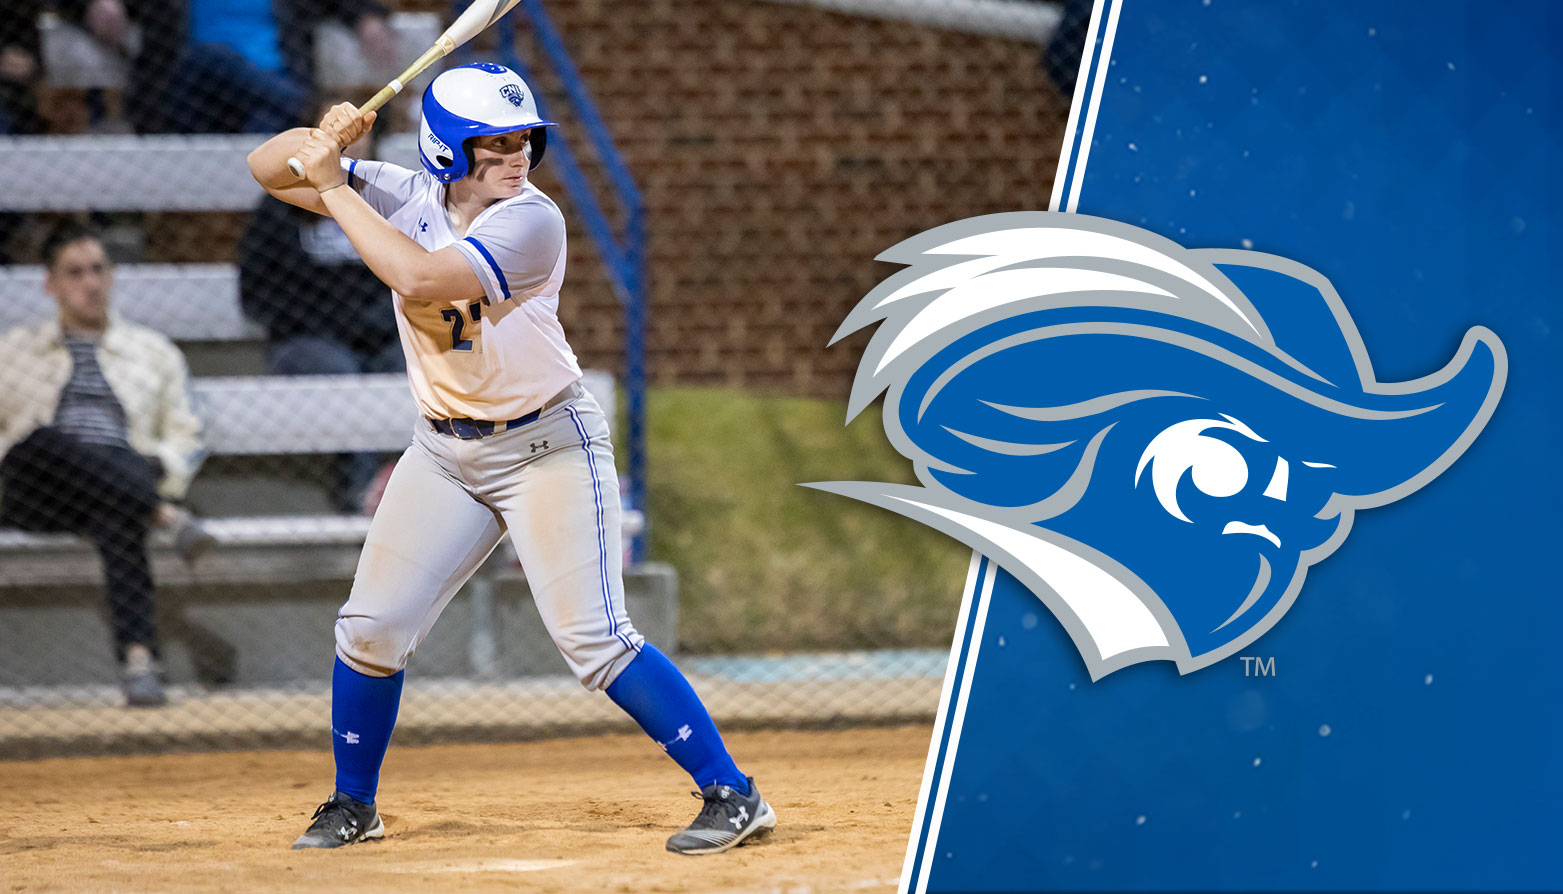 CNU's Kaitlyn Hasty Named CAC Softball Player & Rookie of the Year; 2019 All-CAC Teams Announced